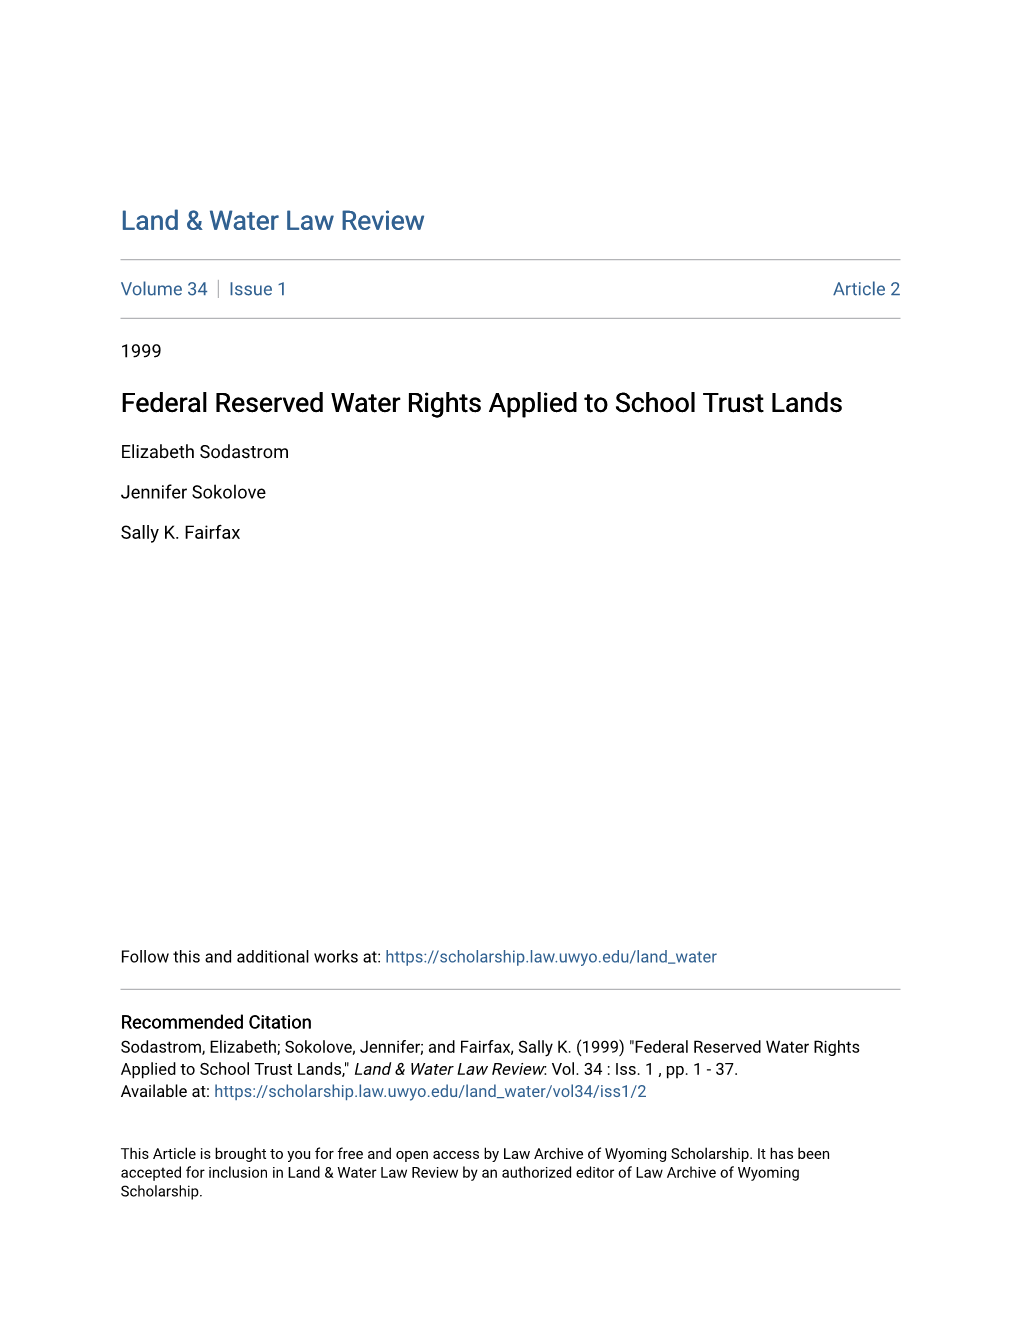 Federal Reserved Water Rights Applied to School Trust Lands